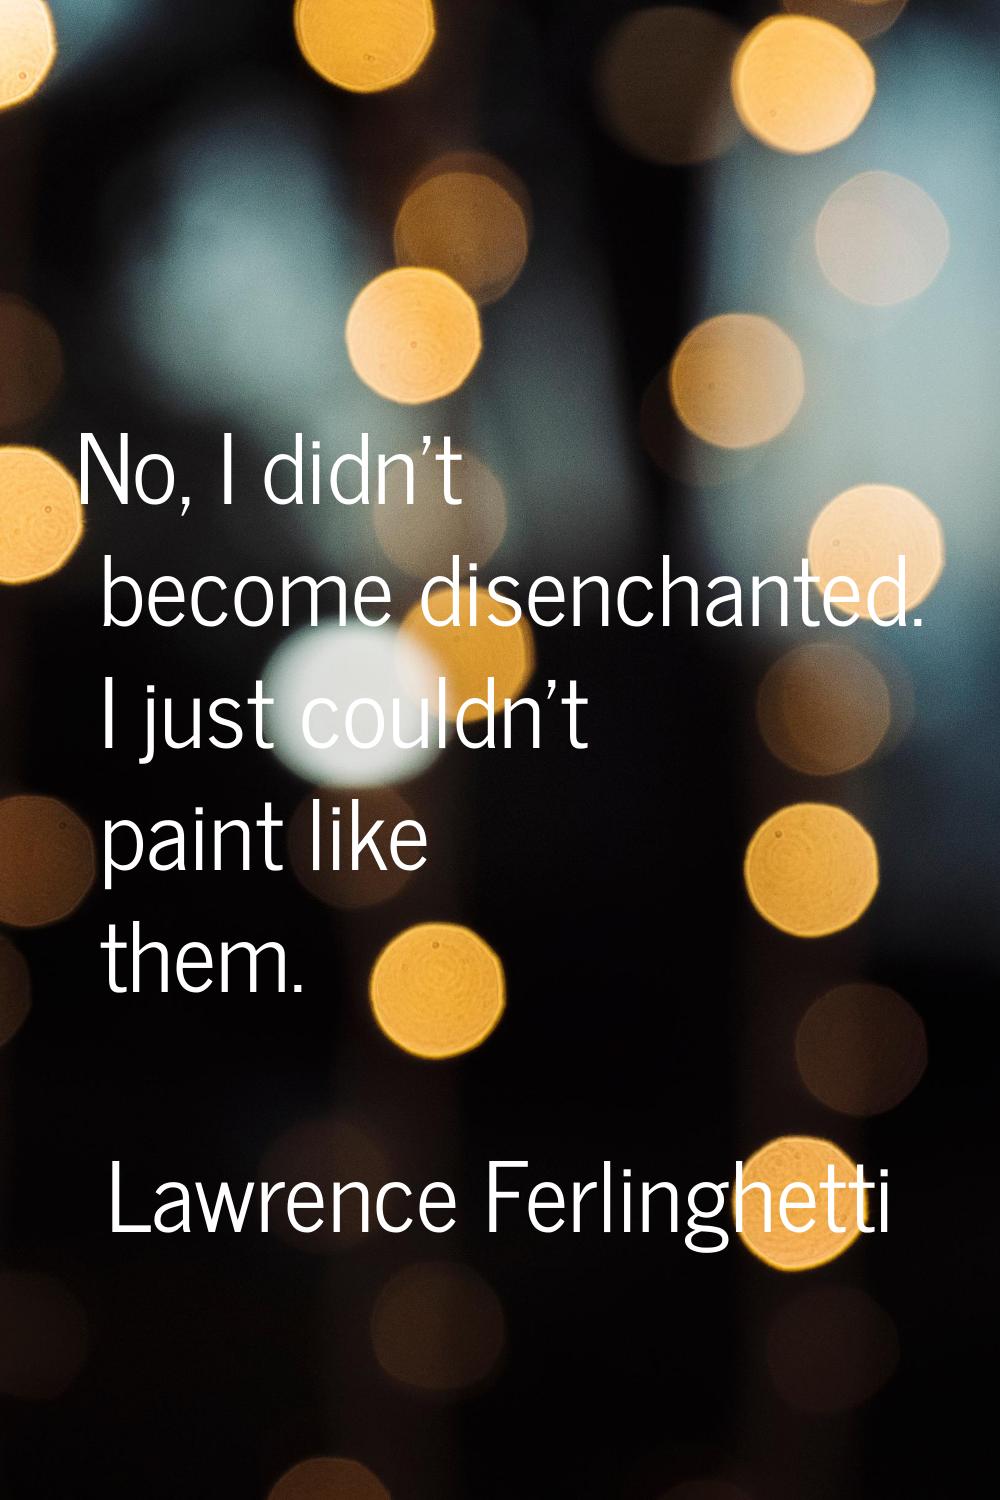 No, I didn't become disenchanted. I just couldn't paint like them.